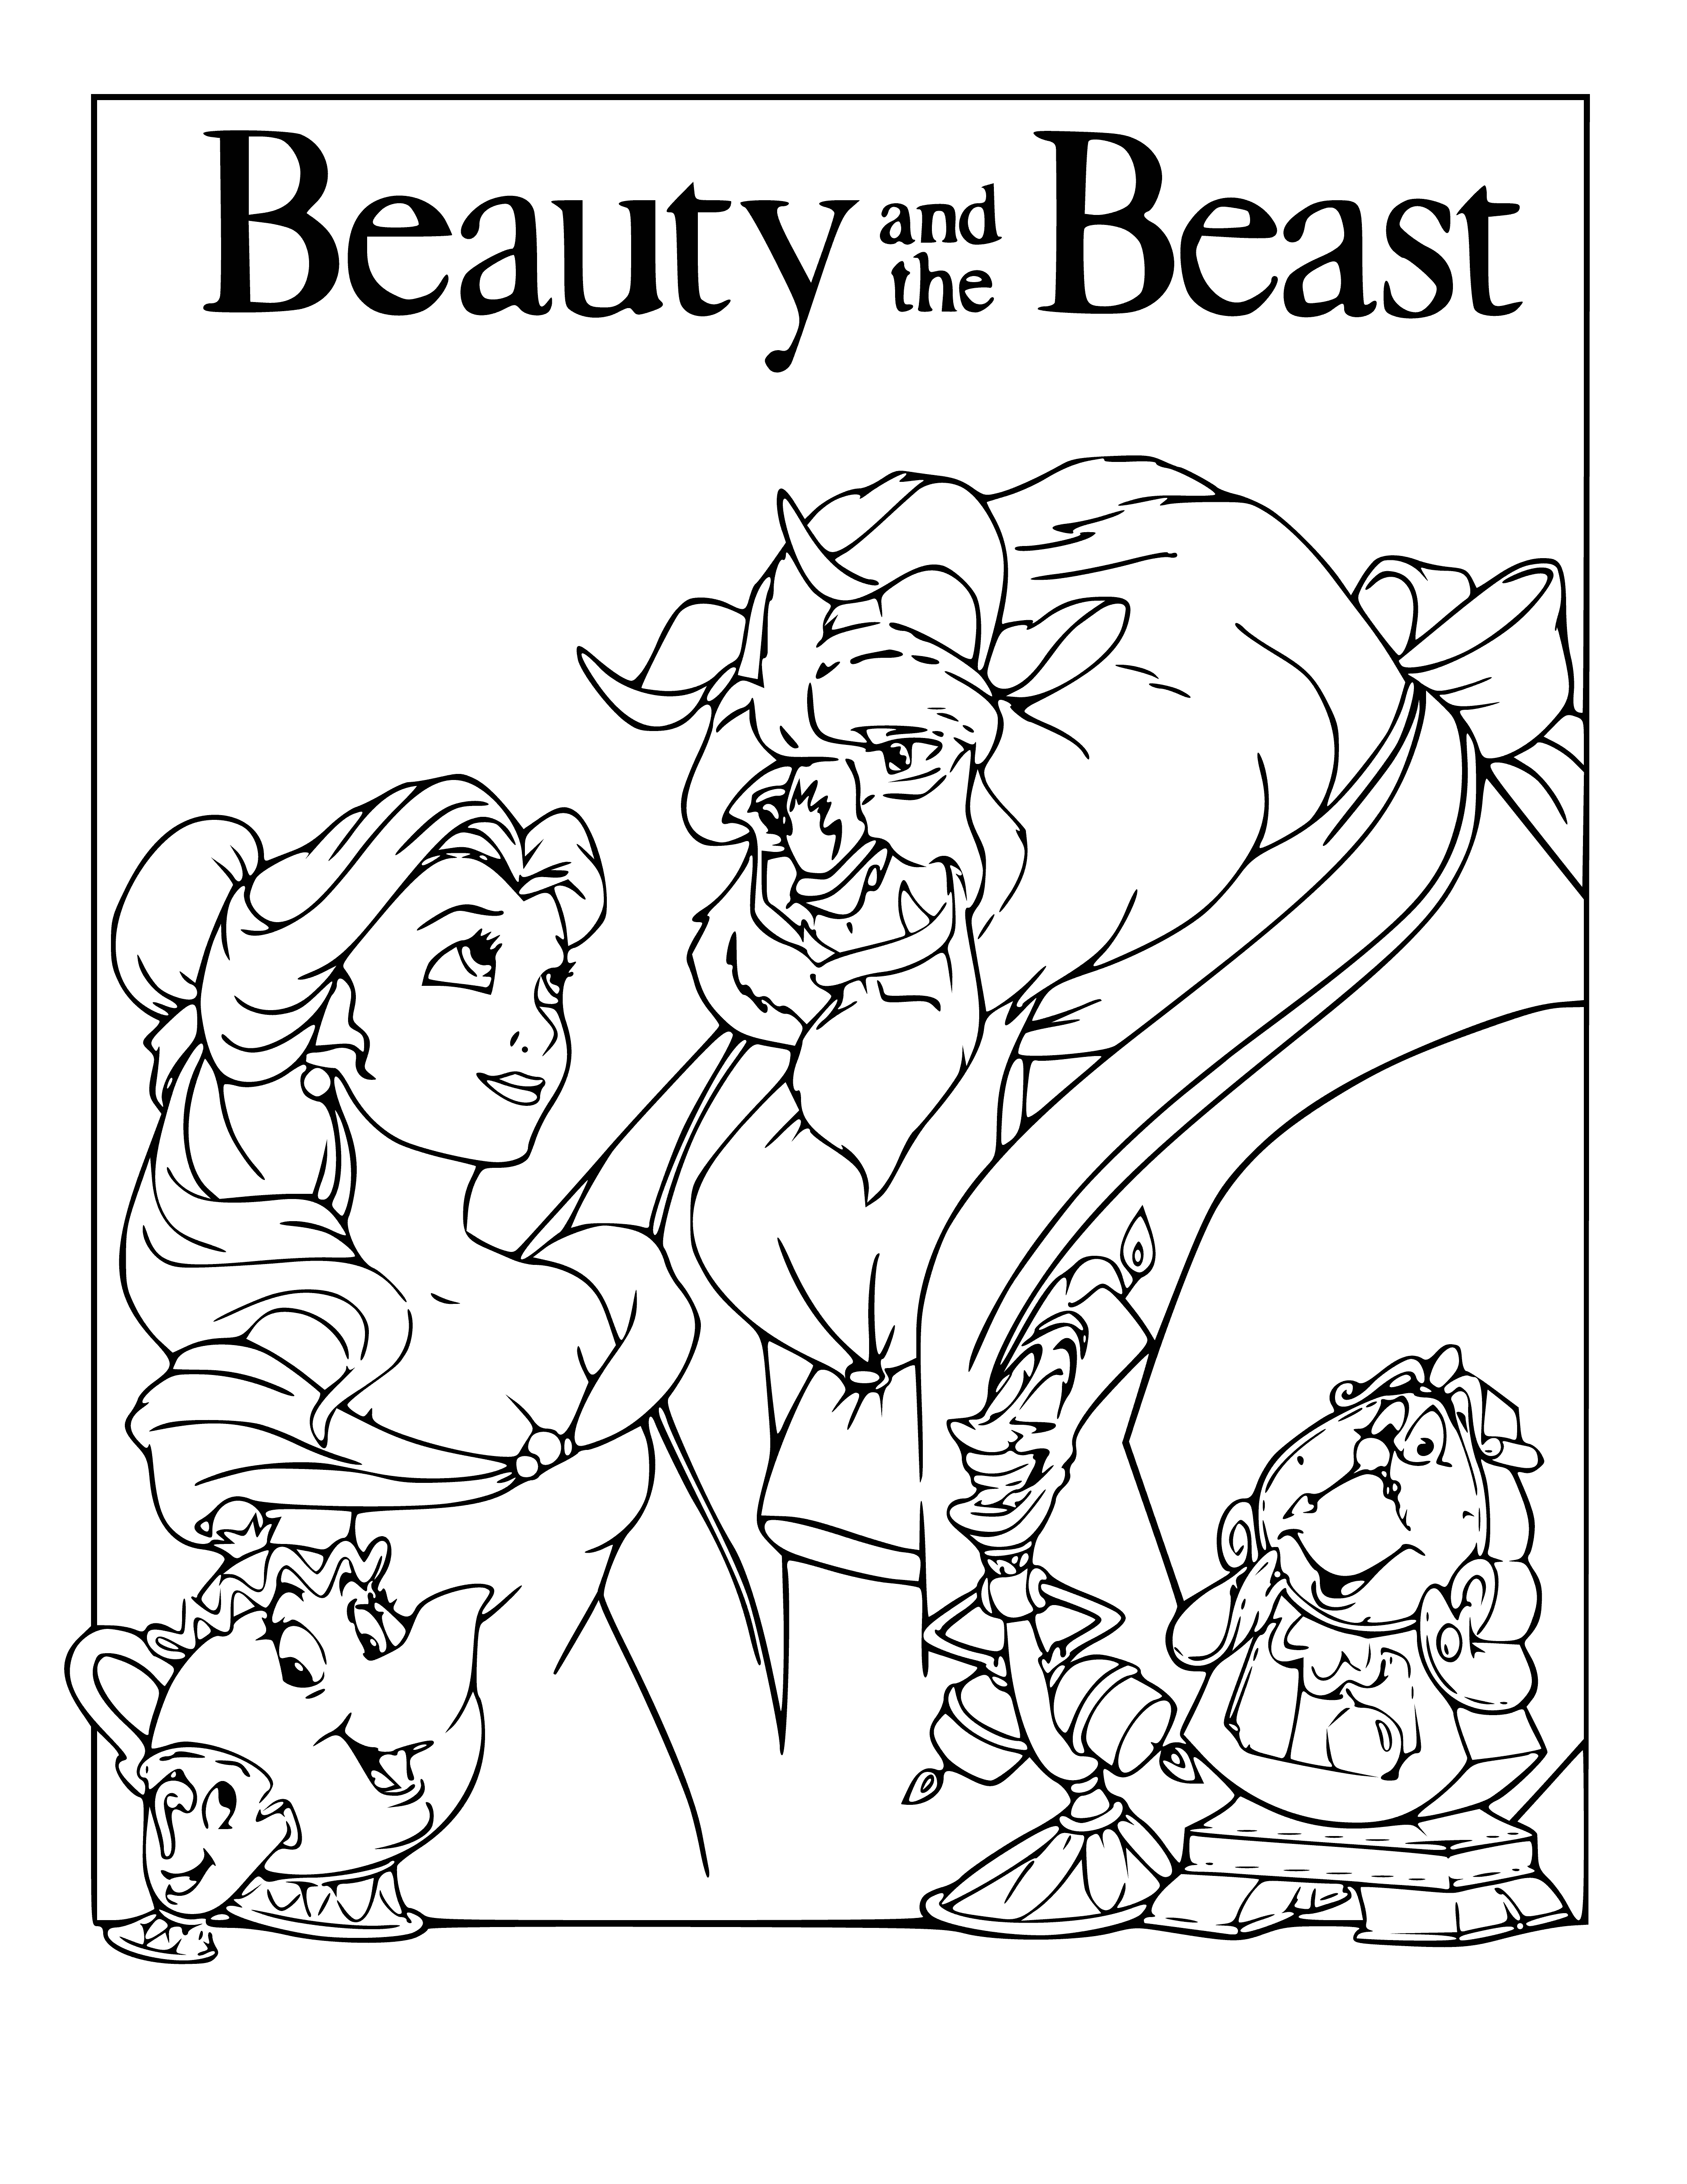 Coloring books for children coloring page